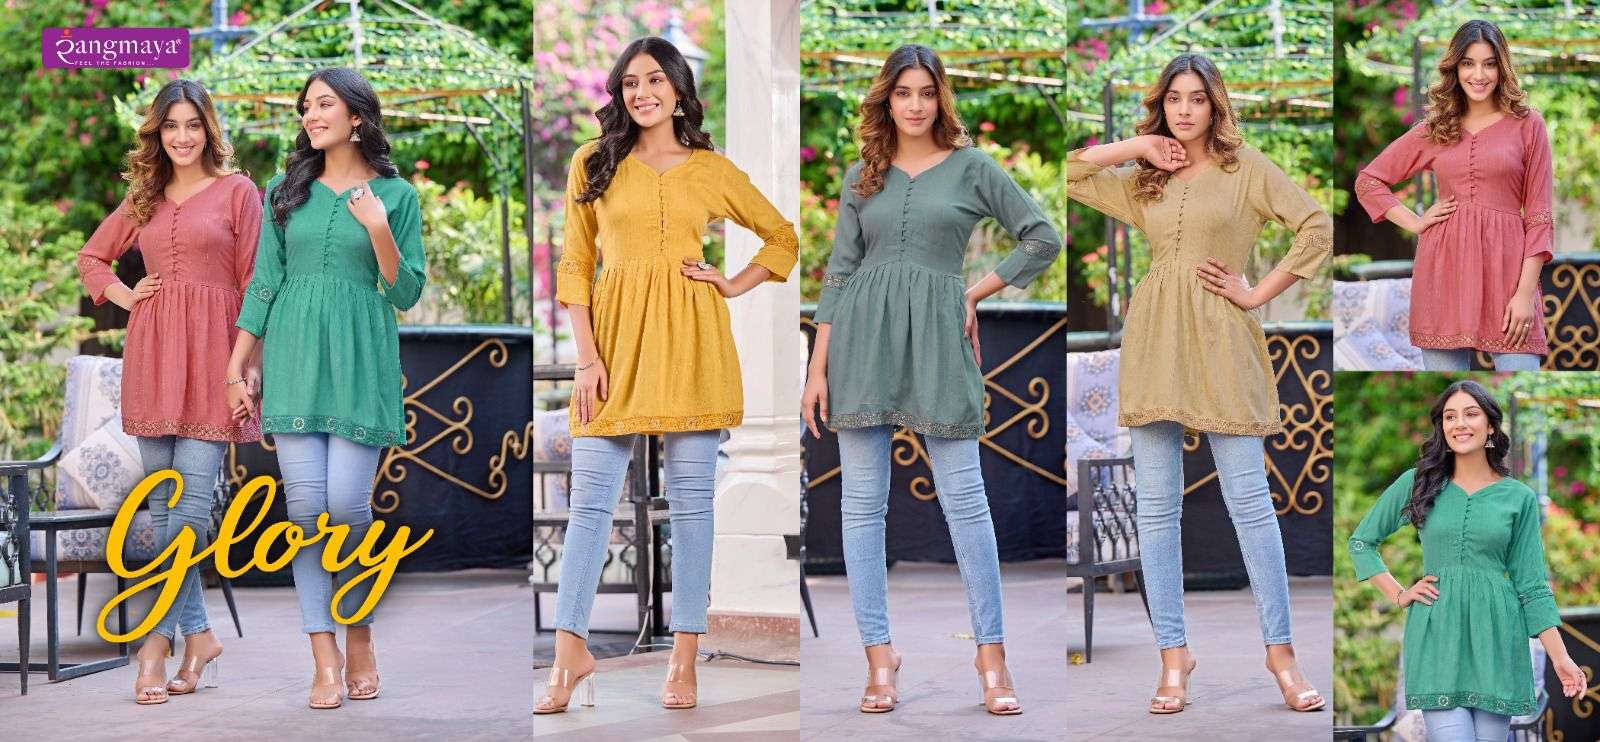 Glory By Rangmaya 101 To 105 Series Beautiful Stylish Fancy Colorful Casual Wear & Ethnic Wear Imported Tops At Wholesale Price